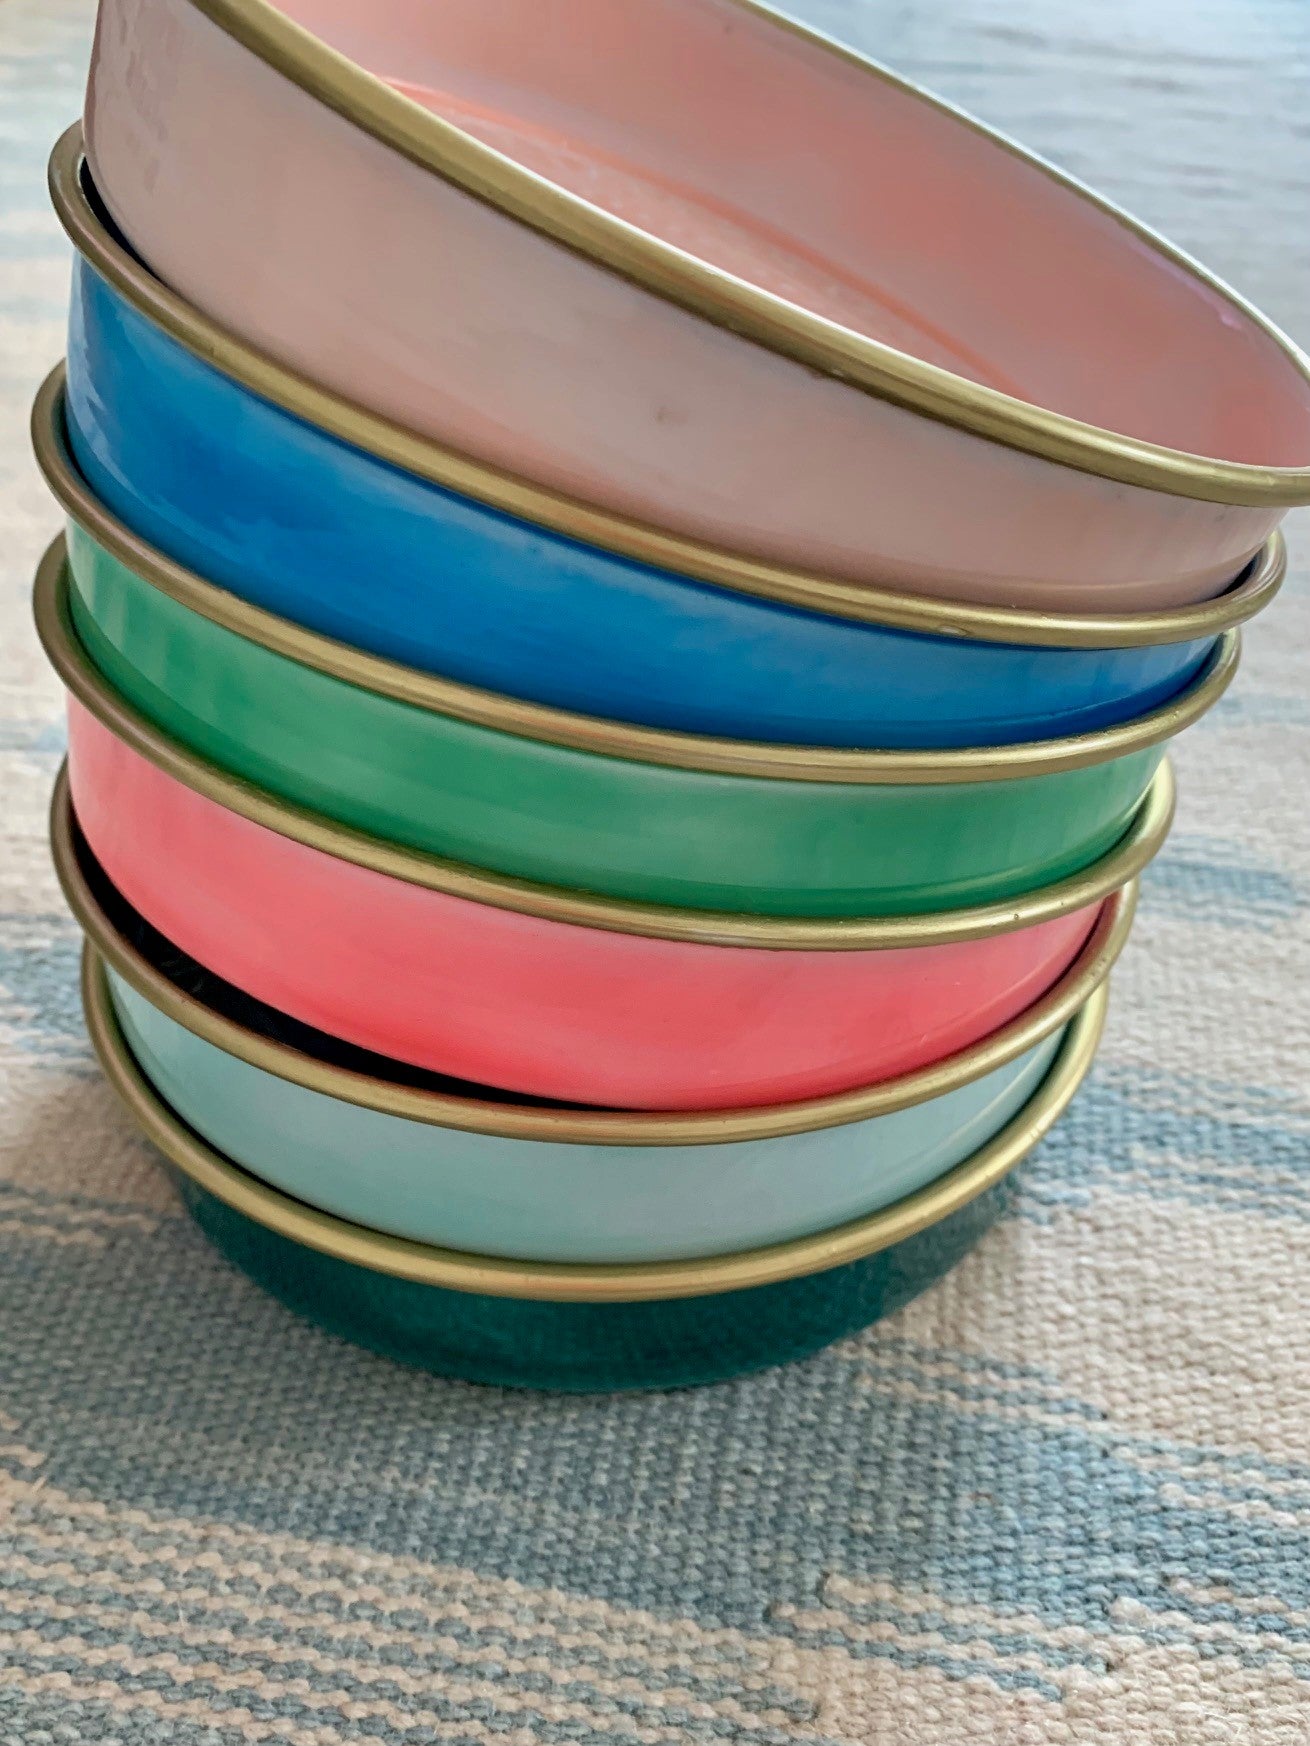 A collection of colourful enamelled trays all stacked up together.